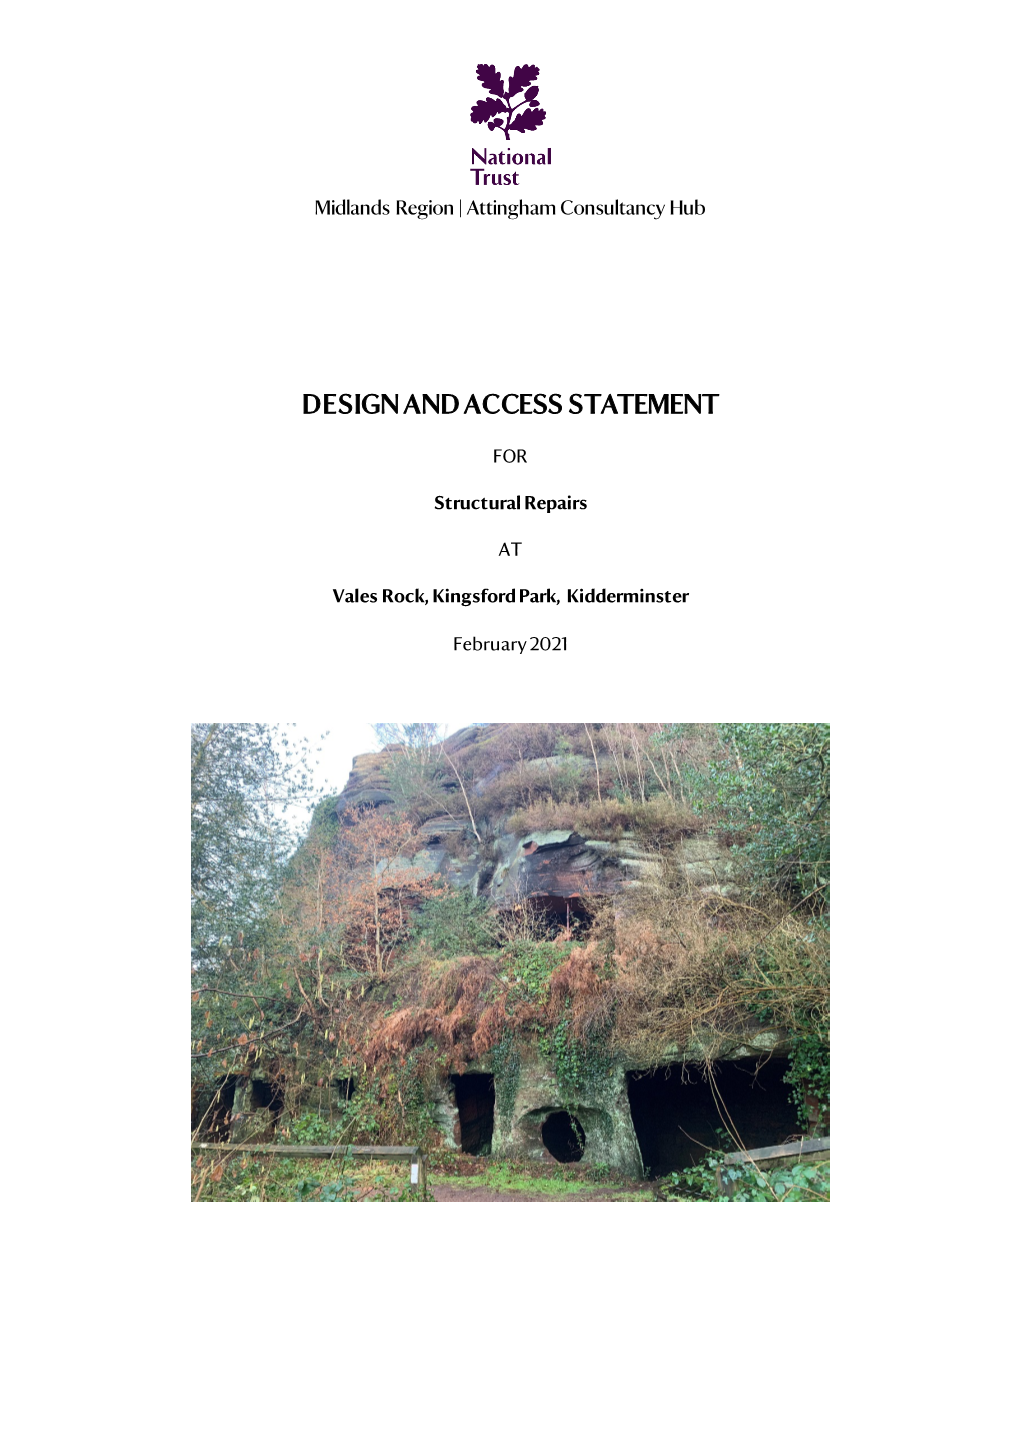 Design and Access Statement